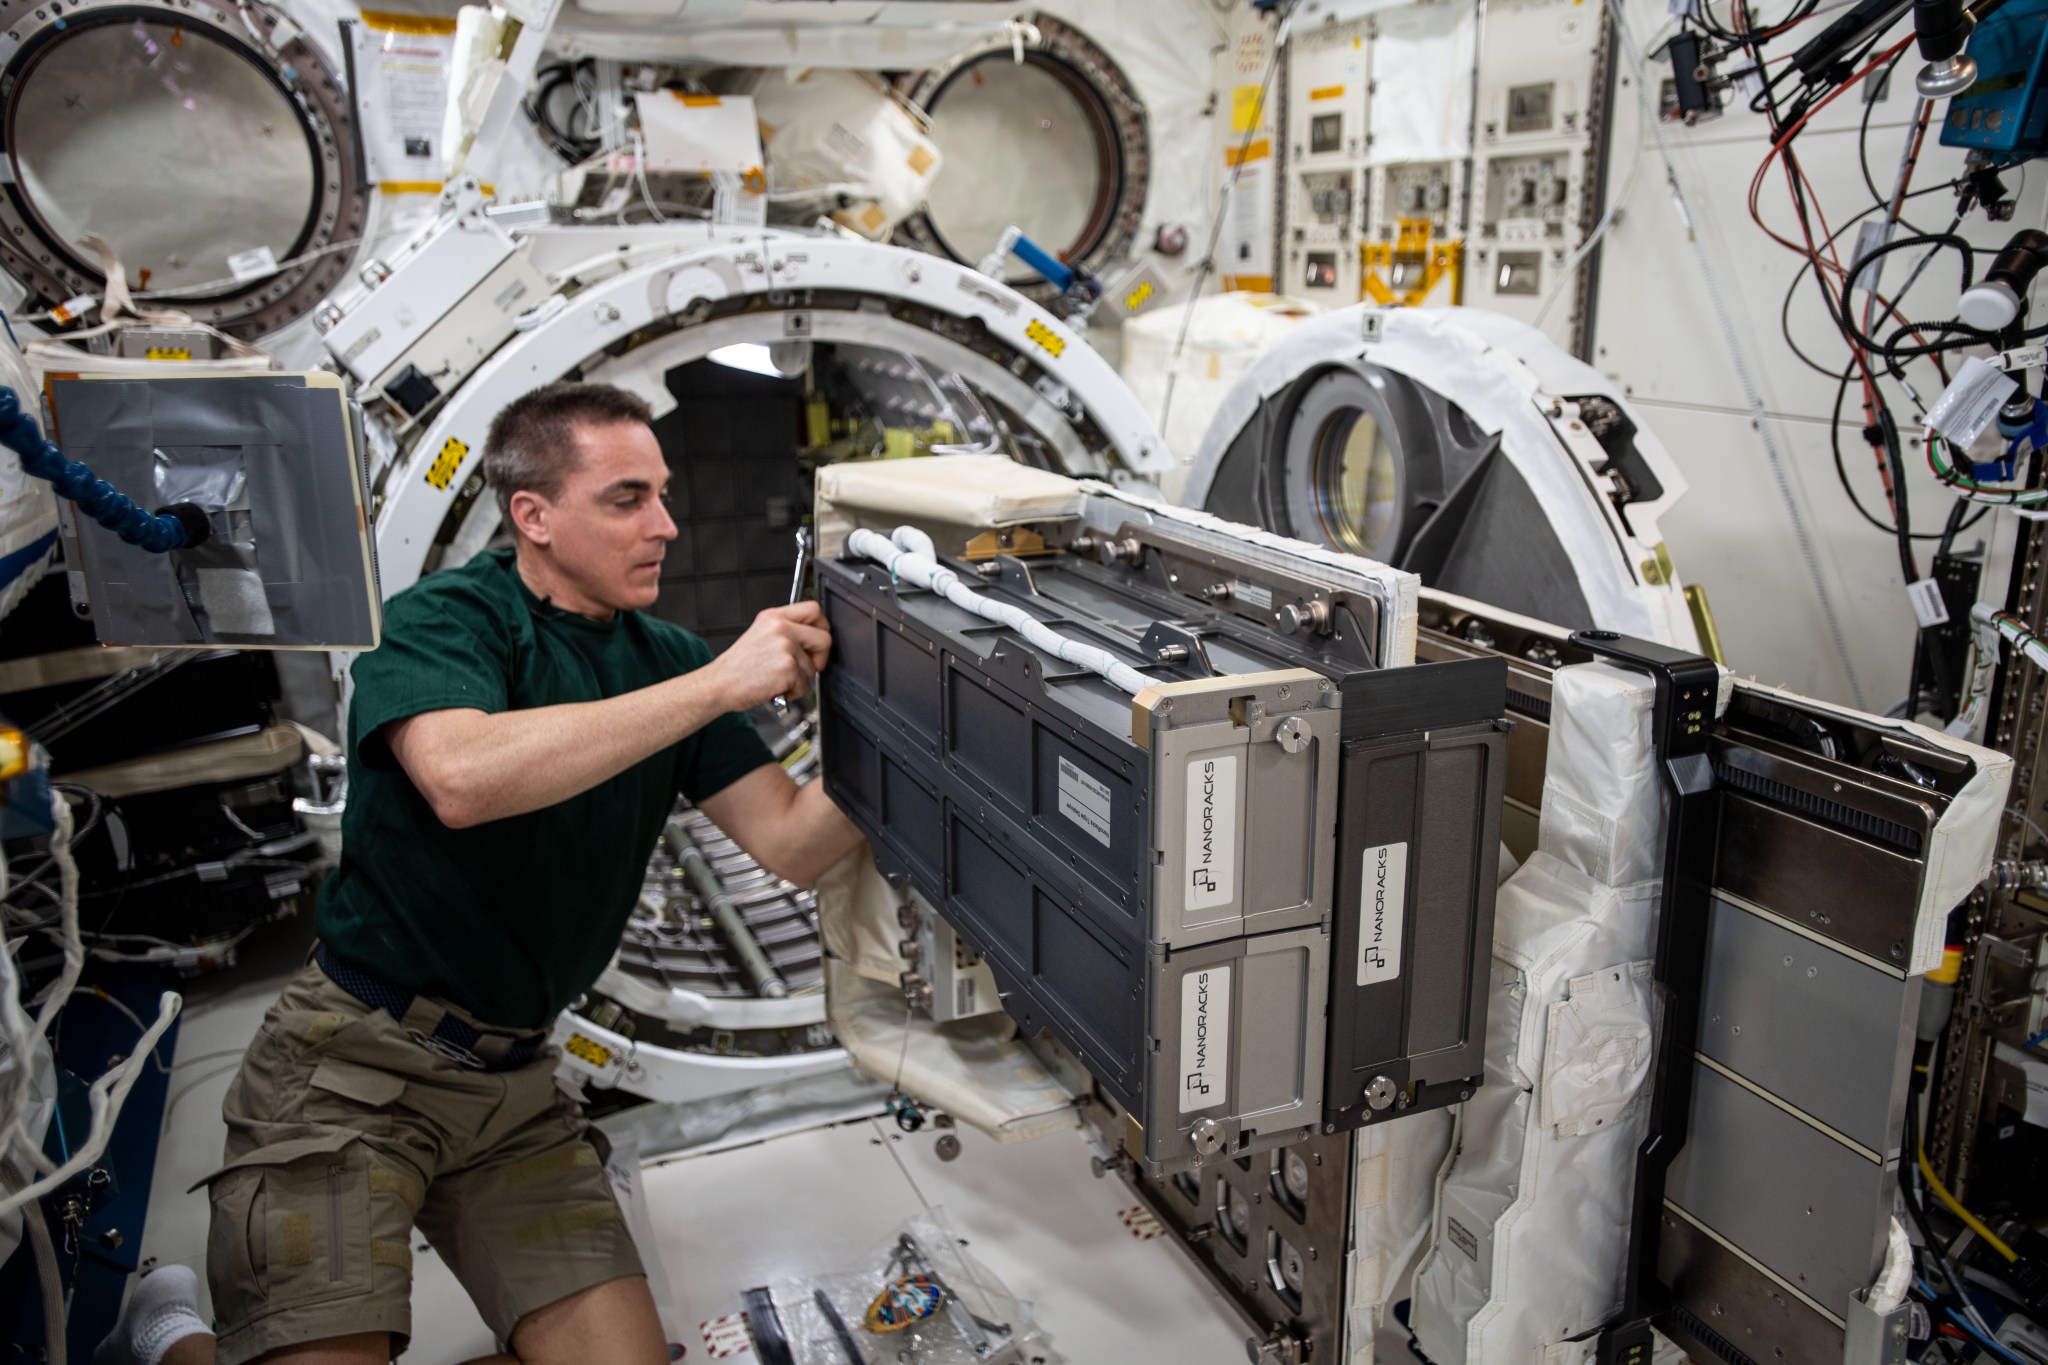 Expedition 63 Commander Chris Cassidy completing NanoRacks CubeSat Deployer Installation on the JEM Airlock